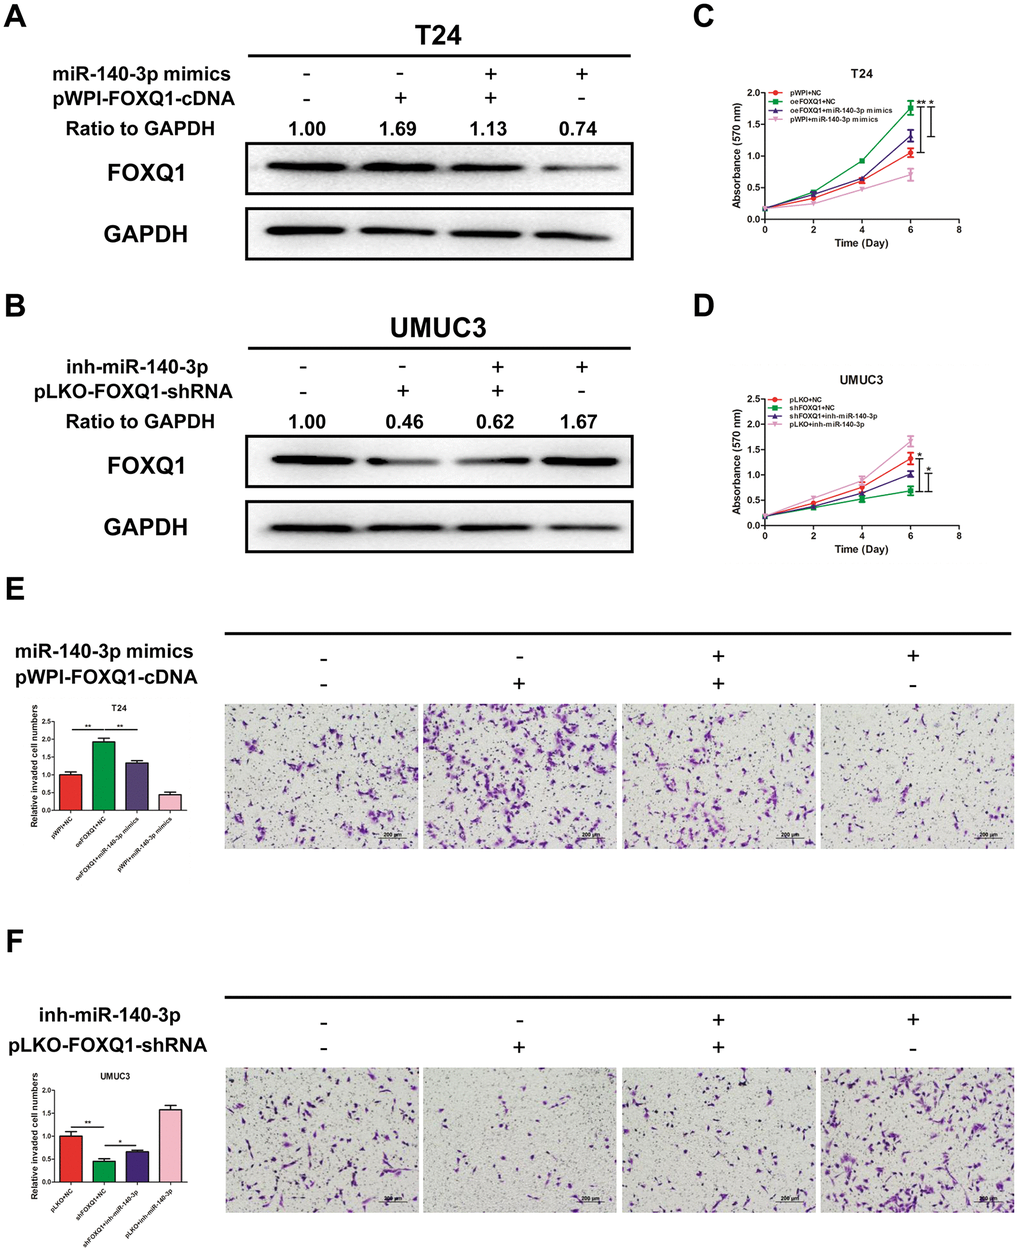 miR-140-3p suppresses proliferation and invasion of BCa cells by reducing FOXQ1 expression. (A, B), Western blot assay was performed to detect FOXQ1 expression. Approximately 50 ug of protein was loaded into each lane 2 to 4 days after transfection. (A) T24 cells were transfected with pWPI+NC, oeFOXQ1+NC, oeFOXQ1+miR-140-3p mimics or pWPI+miR-140-3p mimics. (B) UMUC3 cells were transfected with pLKO+NC, shFOXQ1+NC, shFOXQ1+inh-miR-140-3p or pLKO+ inh-miR-140-3p (C) An MTT rescue assay revealed that FOXQ1-increased cell proliferation could be reversed after adding miR-140-3p mimics to T24 cells. (D) An MTT rescue assay revealed that shFOXQ1-decreased cell proliferation could be reversed after adding miR-140-3p inhibitor to UMUC3 cells. (E) A transwell invasion assay revealed that FOXQ1-increased cell invasion could be reversed after adding miR-140-3p mimics to T24 cells. (F) A transwell invasion assay revealed that shFOXQ1-decreased cell invasion could be reversed after adding miR-140-3p inhibitor to UMUC3 cells. (C–F) Each sample was run in triplicate and used in multiple experiments to determine the mean ± SD. *P P 